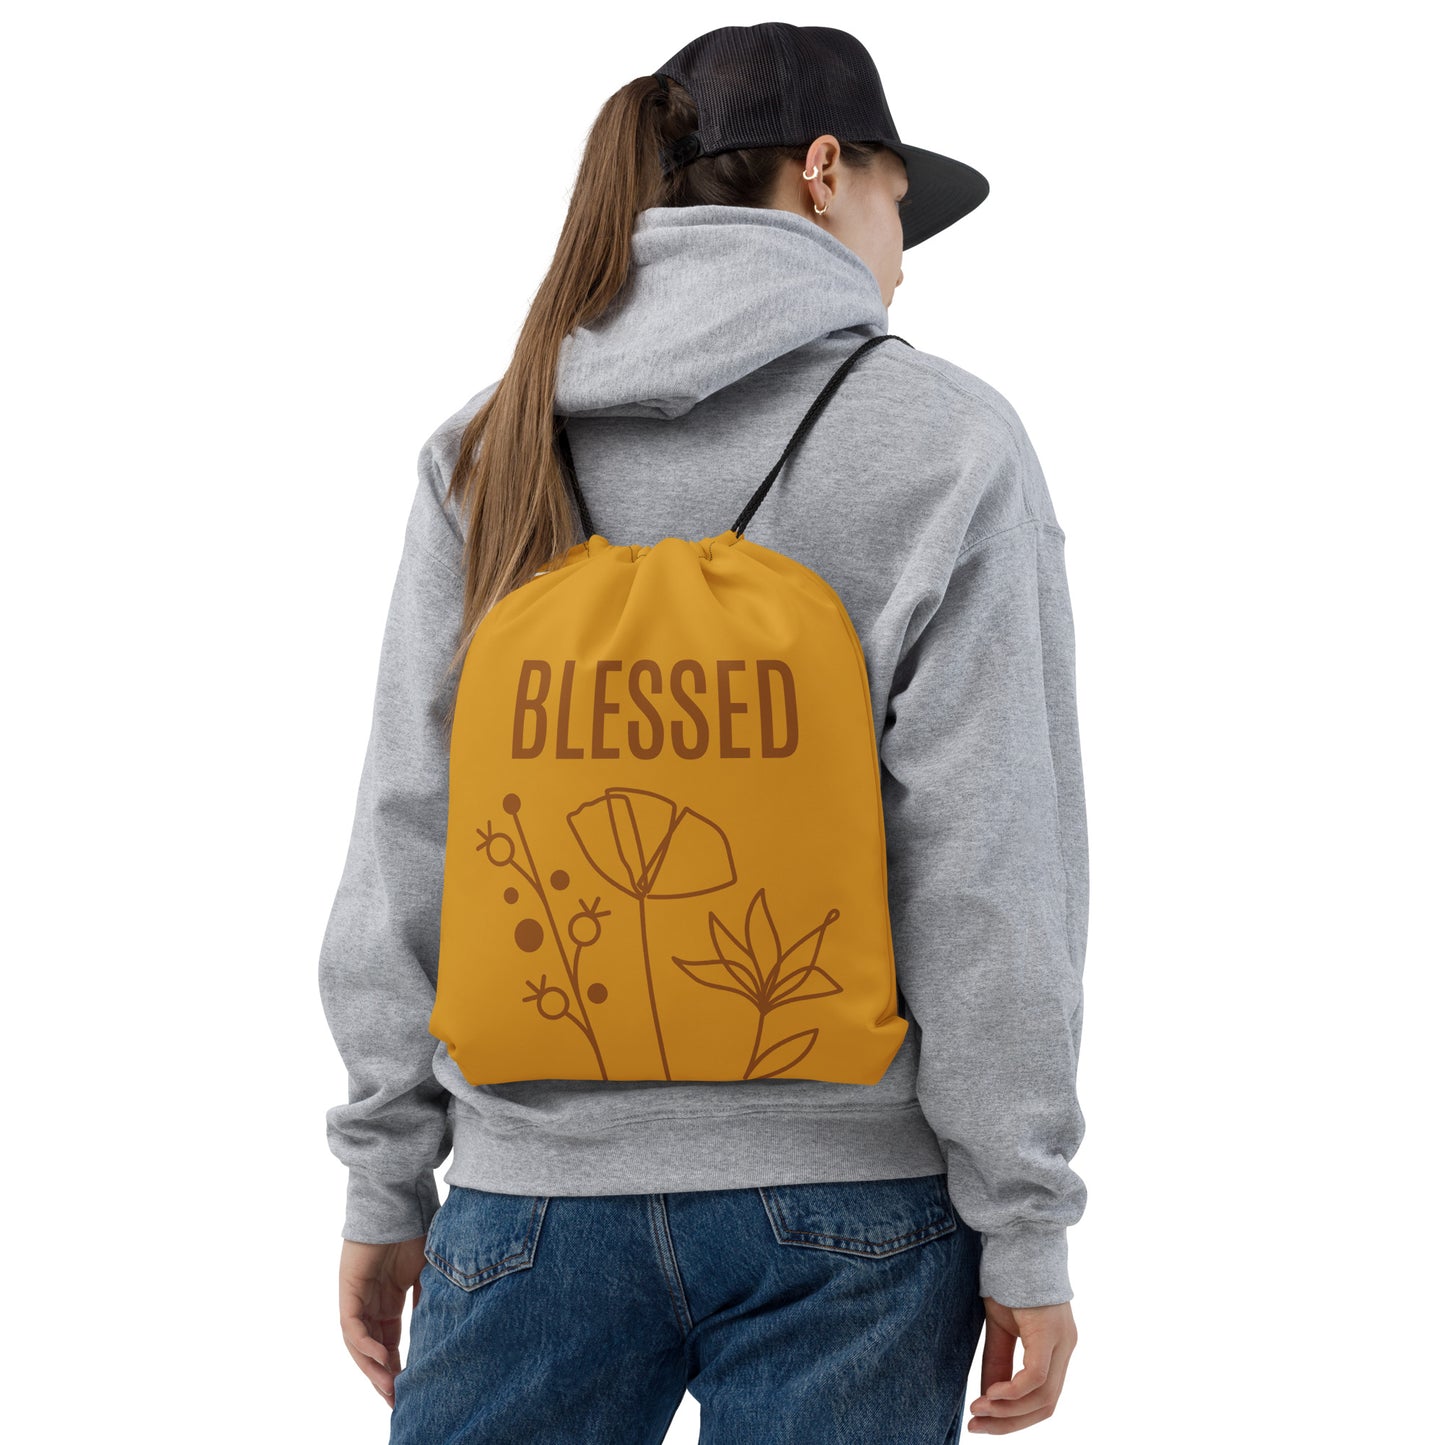 Cool drawstring bag with BLESSED text and monoline illustration